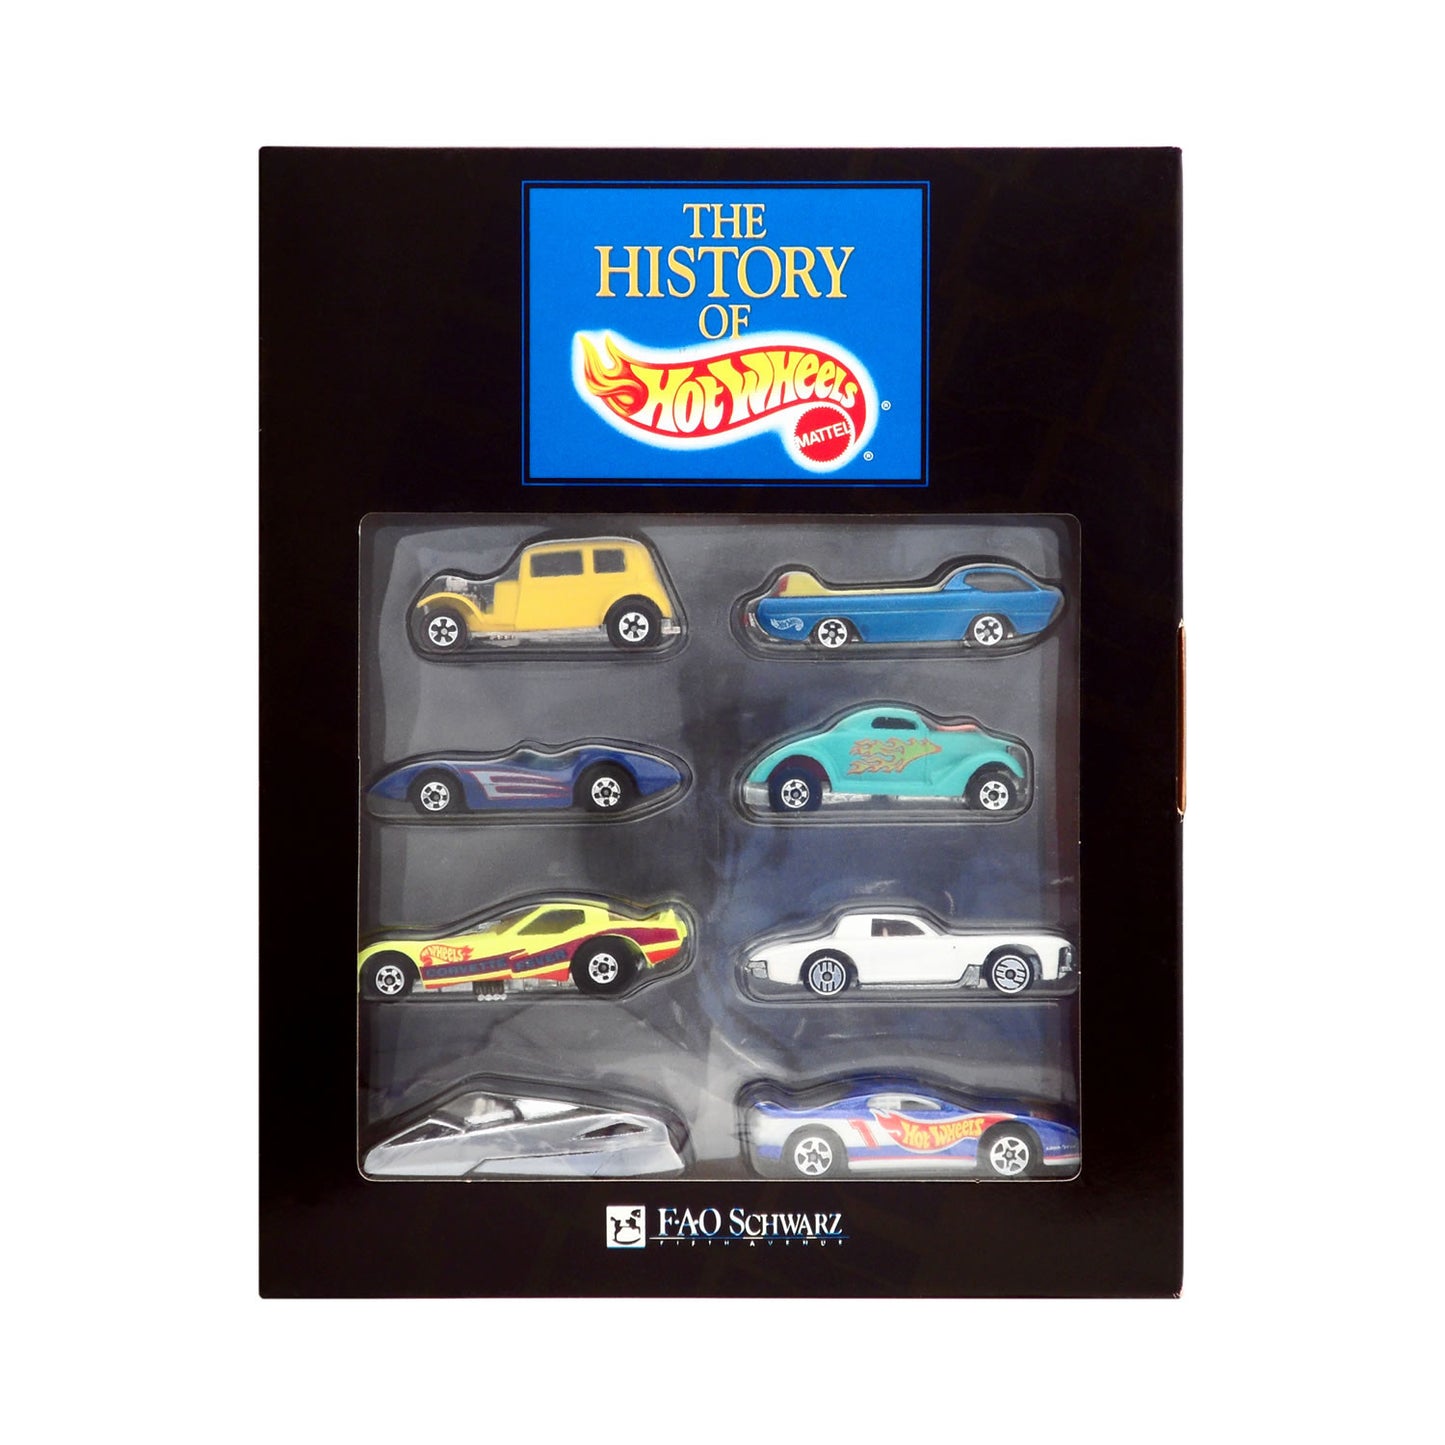 FAO Schwarz Exclusive The History of Hot Wheels